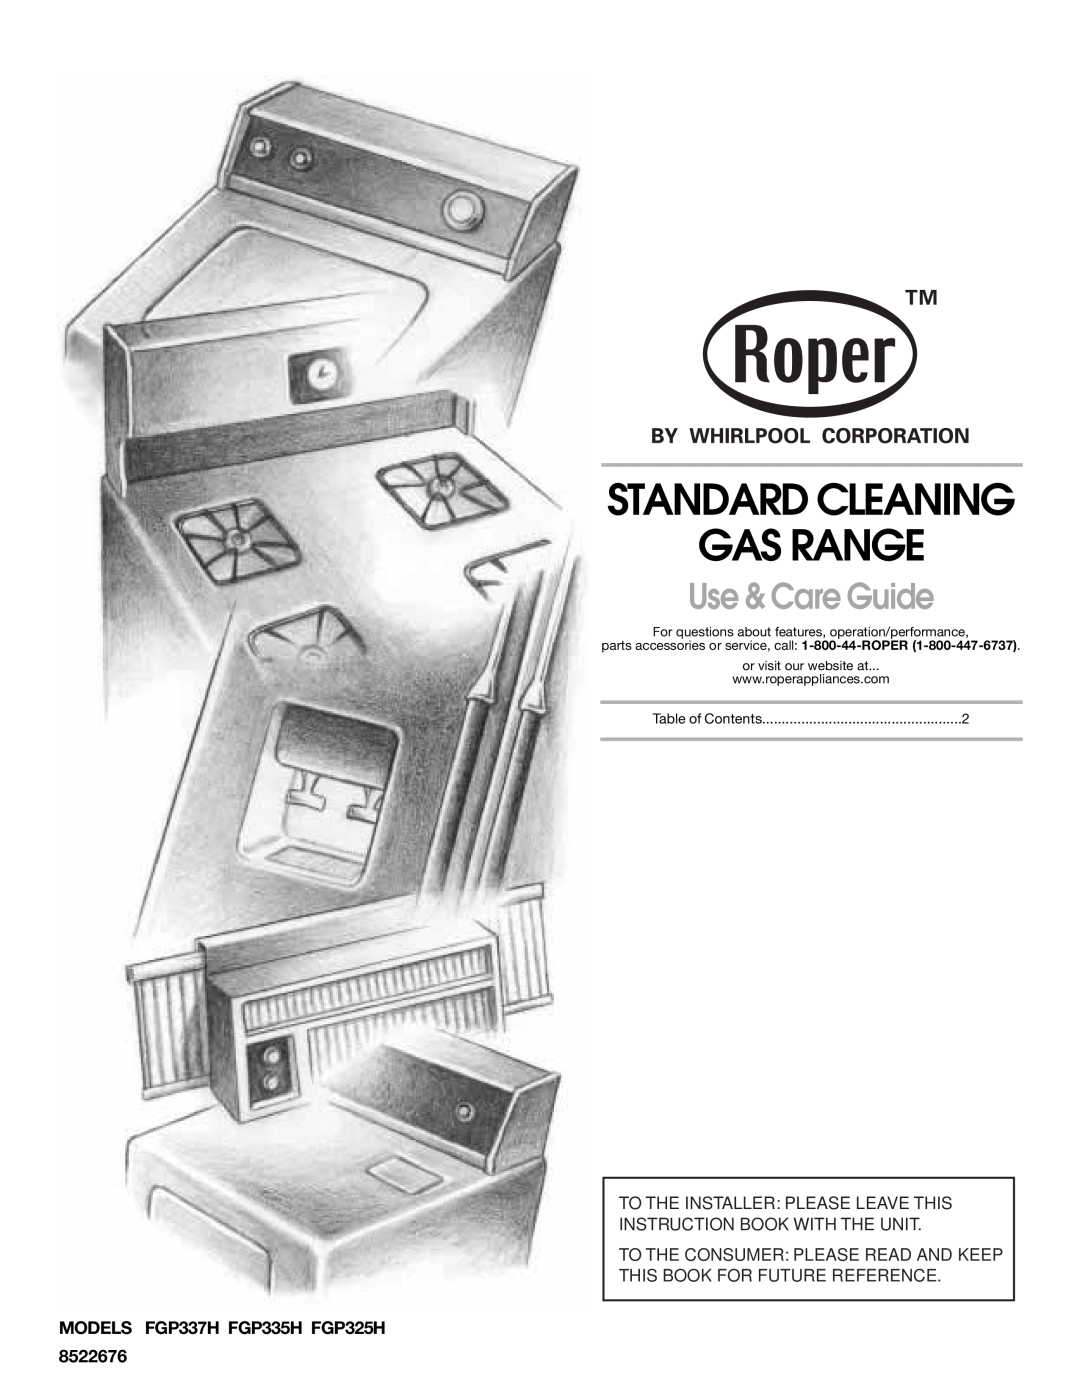 Whirlpool FGP325H manual Standard Cleaning Gas Range, Use & Care Guide, parts accessories or service, call 1-800-44-ROPER 